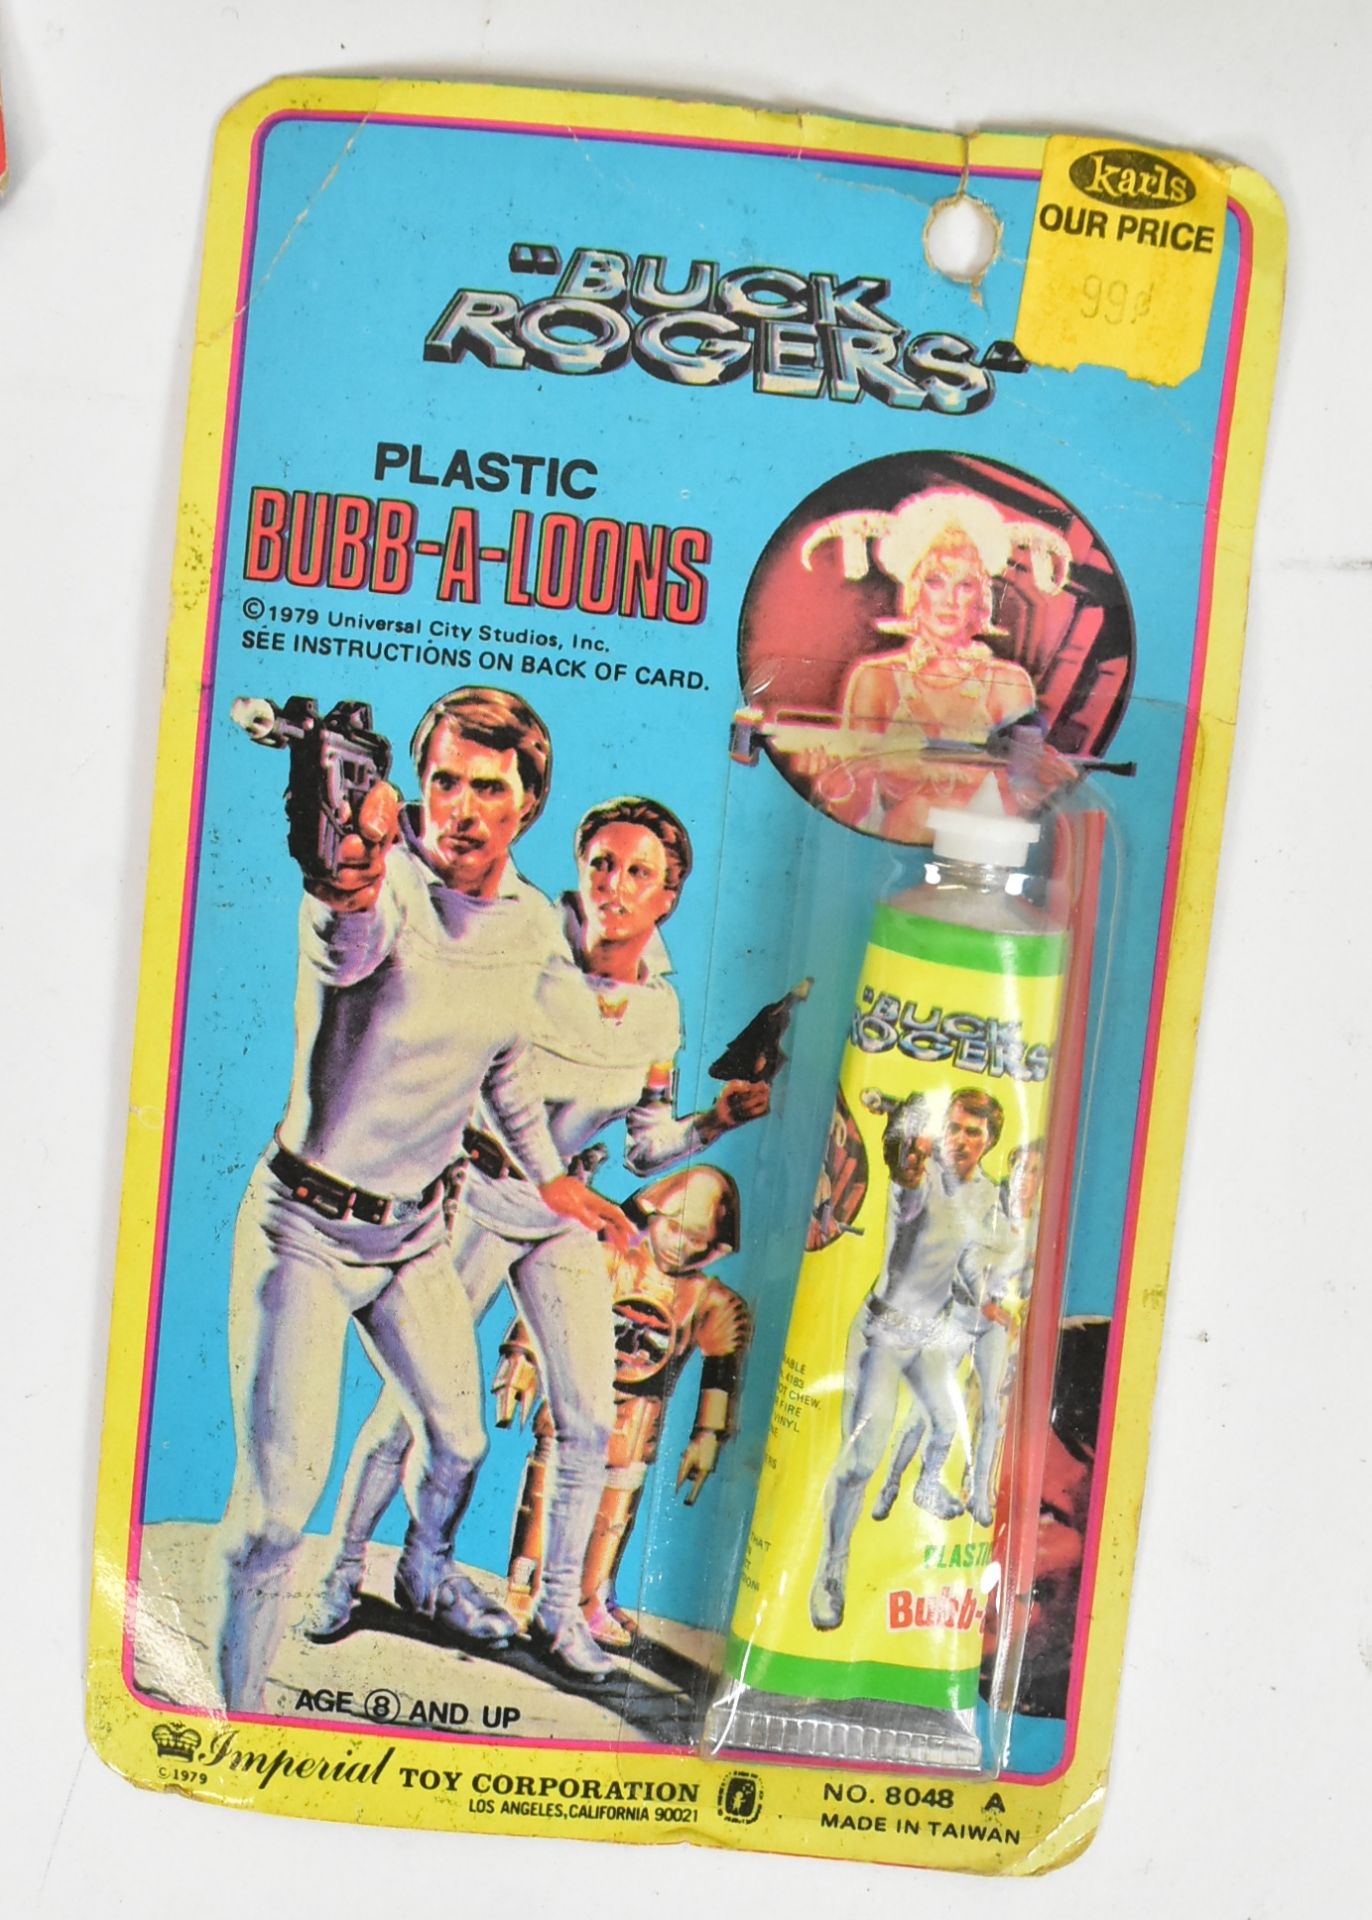 BUCK ROGERS - COLLECTION OF VINTAGE MEMORABILIA - Image 4 of 5